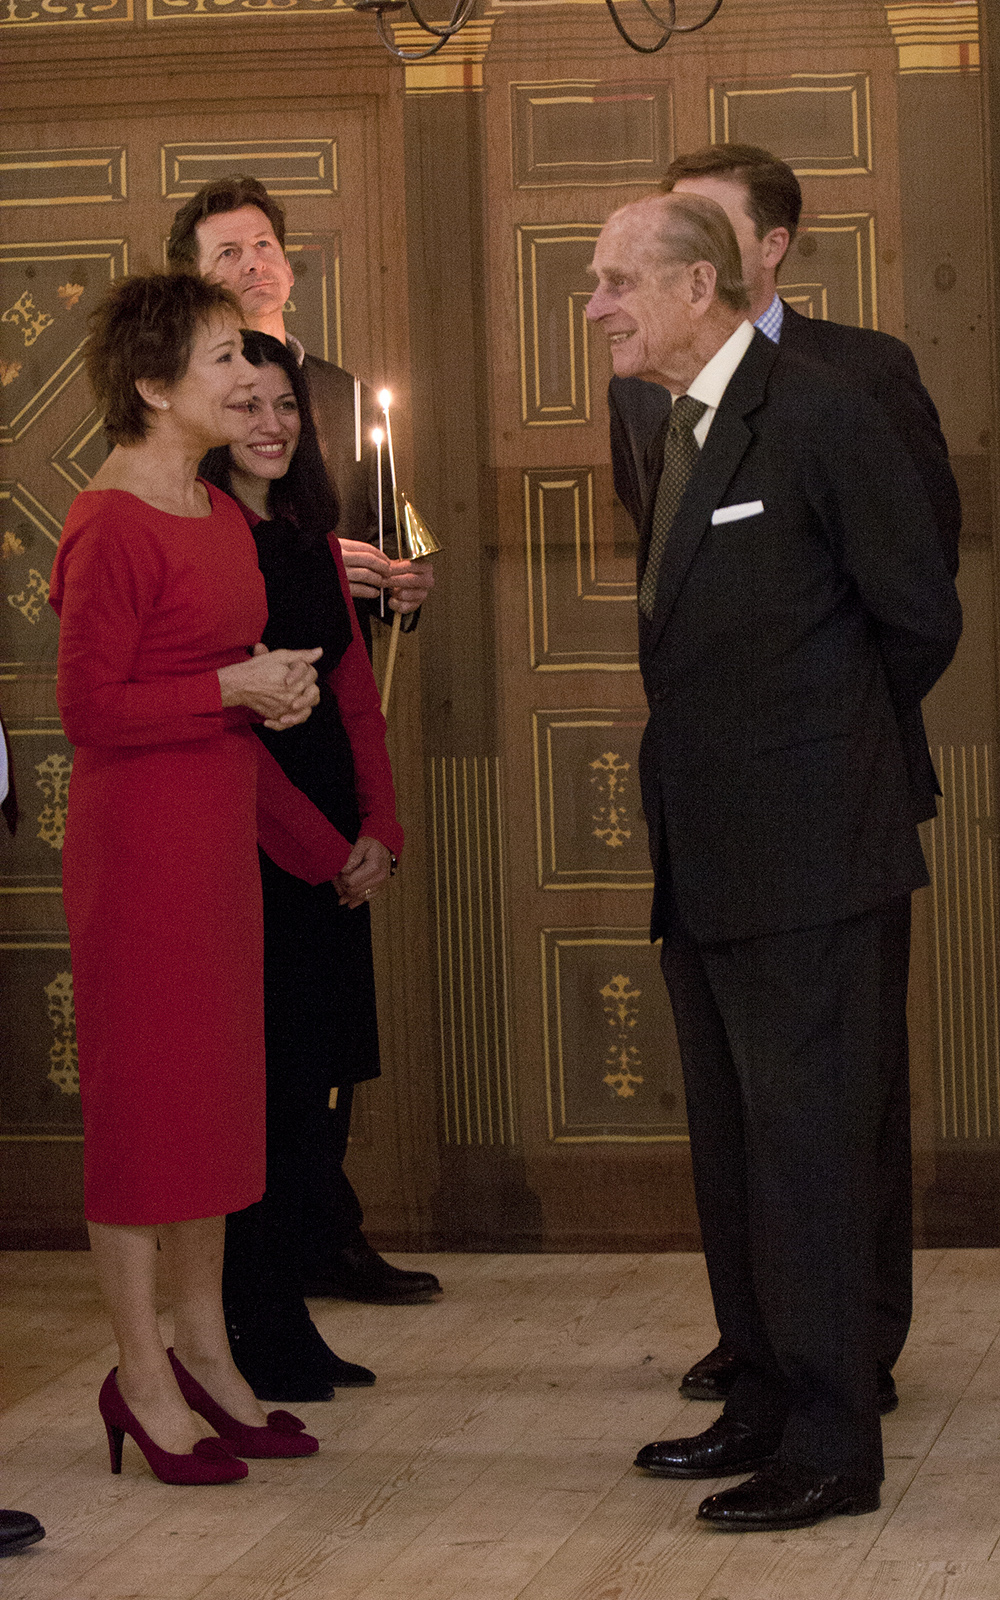 Zoe Wanamaker and His Royal Highness The Prince Philip, Duke of Edinburgh stand talking to each other in the Sam Wanamaker Playhouse.